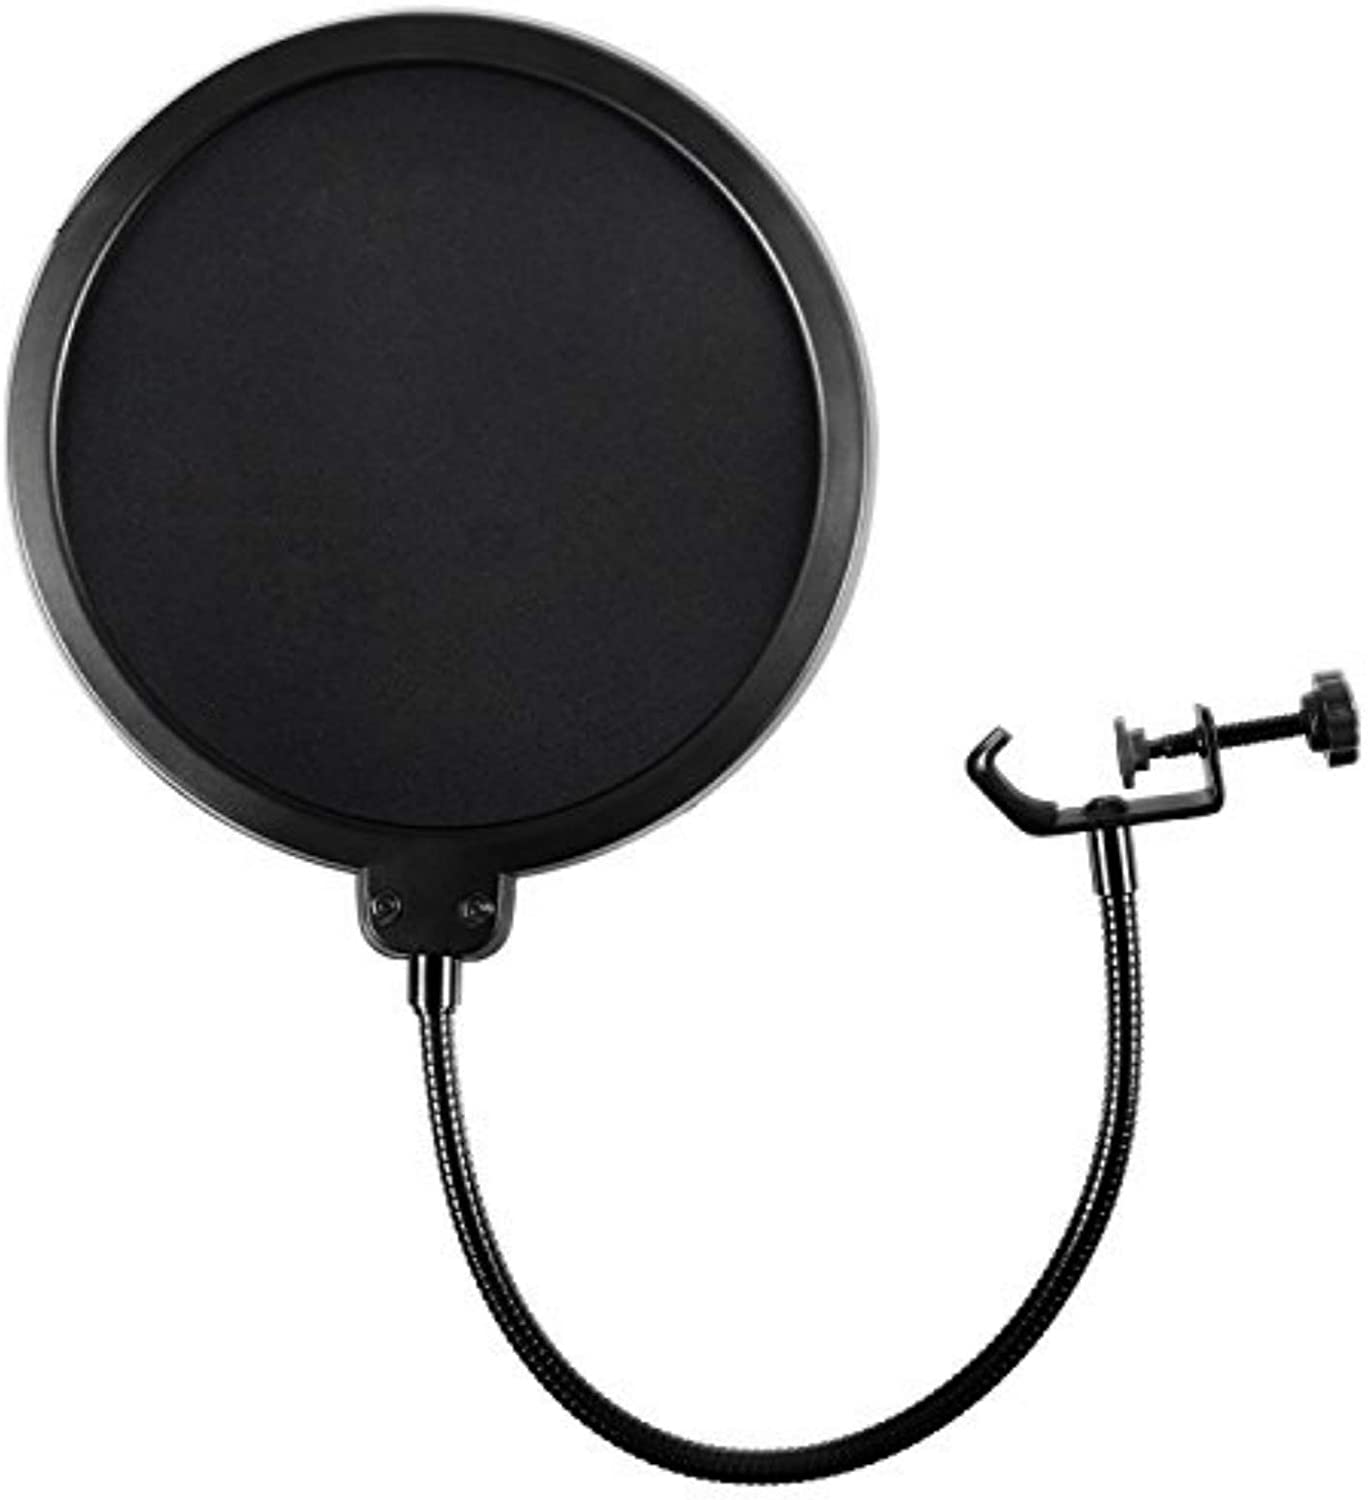 Earamble’s pop filter is one of the best-selling pop filters there are. Its gooseneck doesn